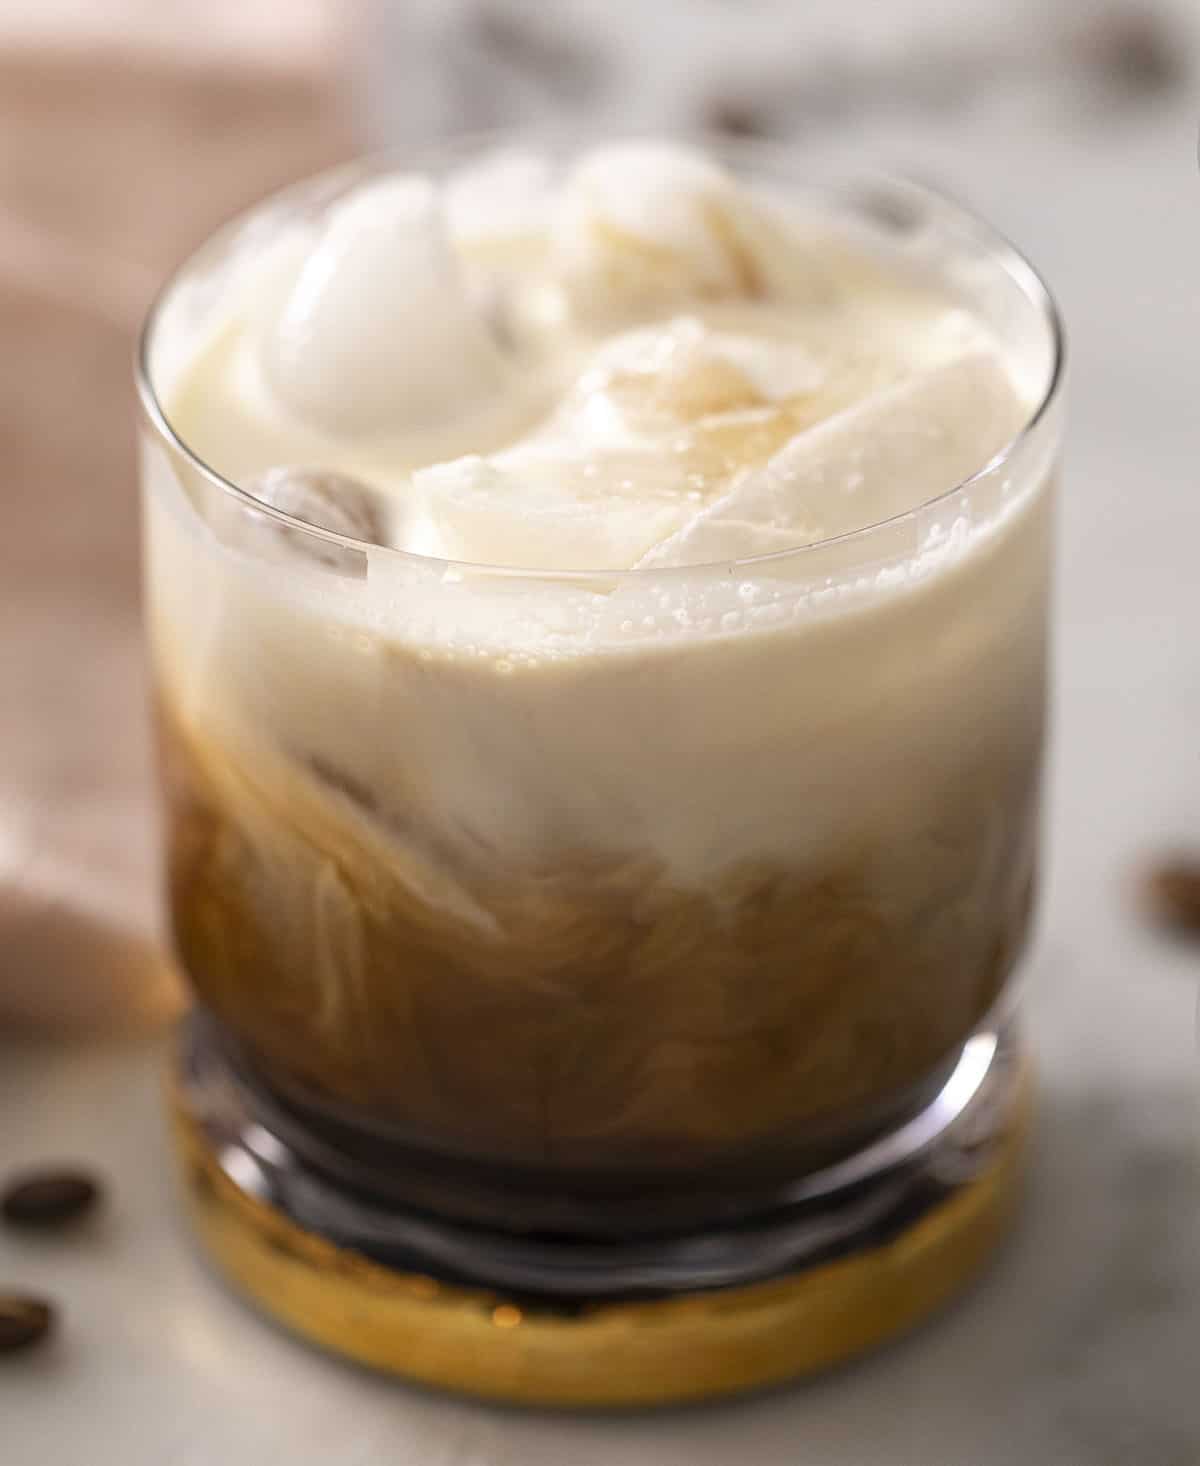 A close up of a coffee and vodka cocktail topped with whipped cream (White Russian)